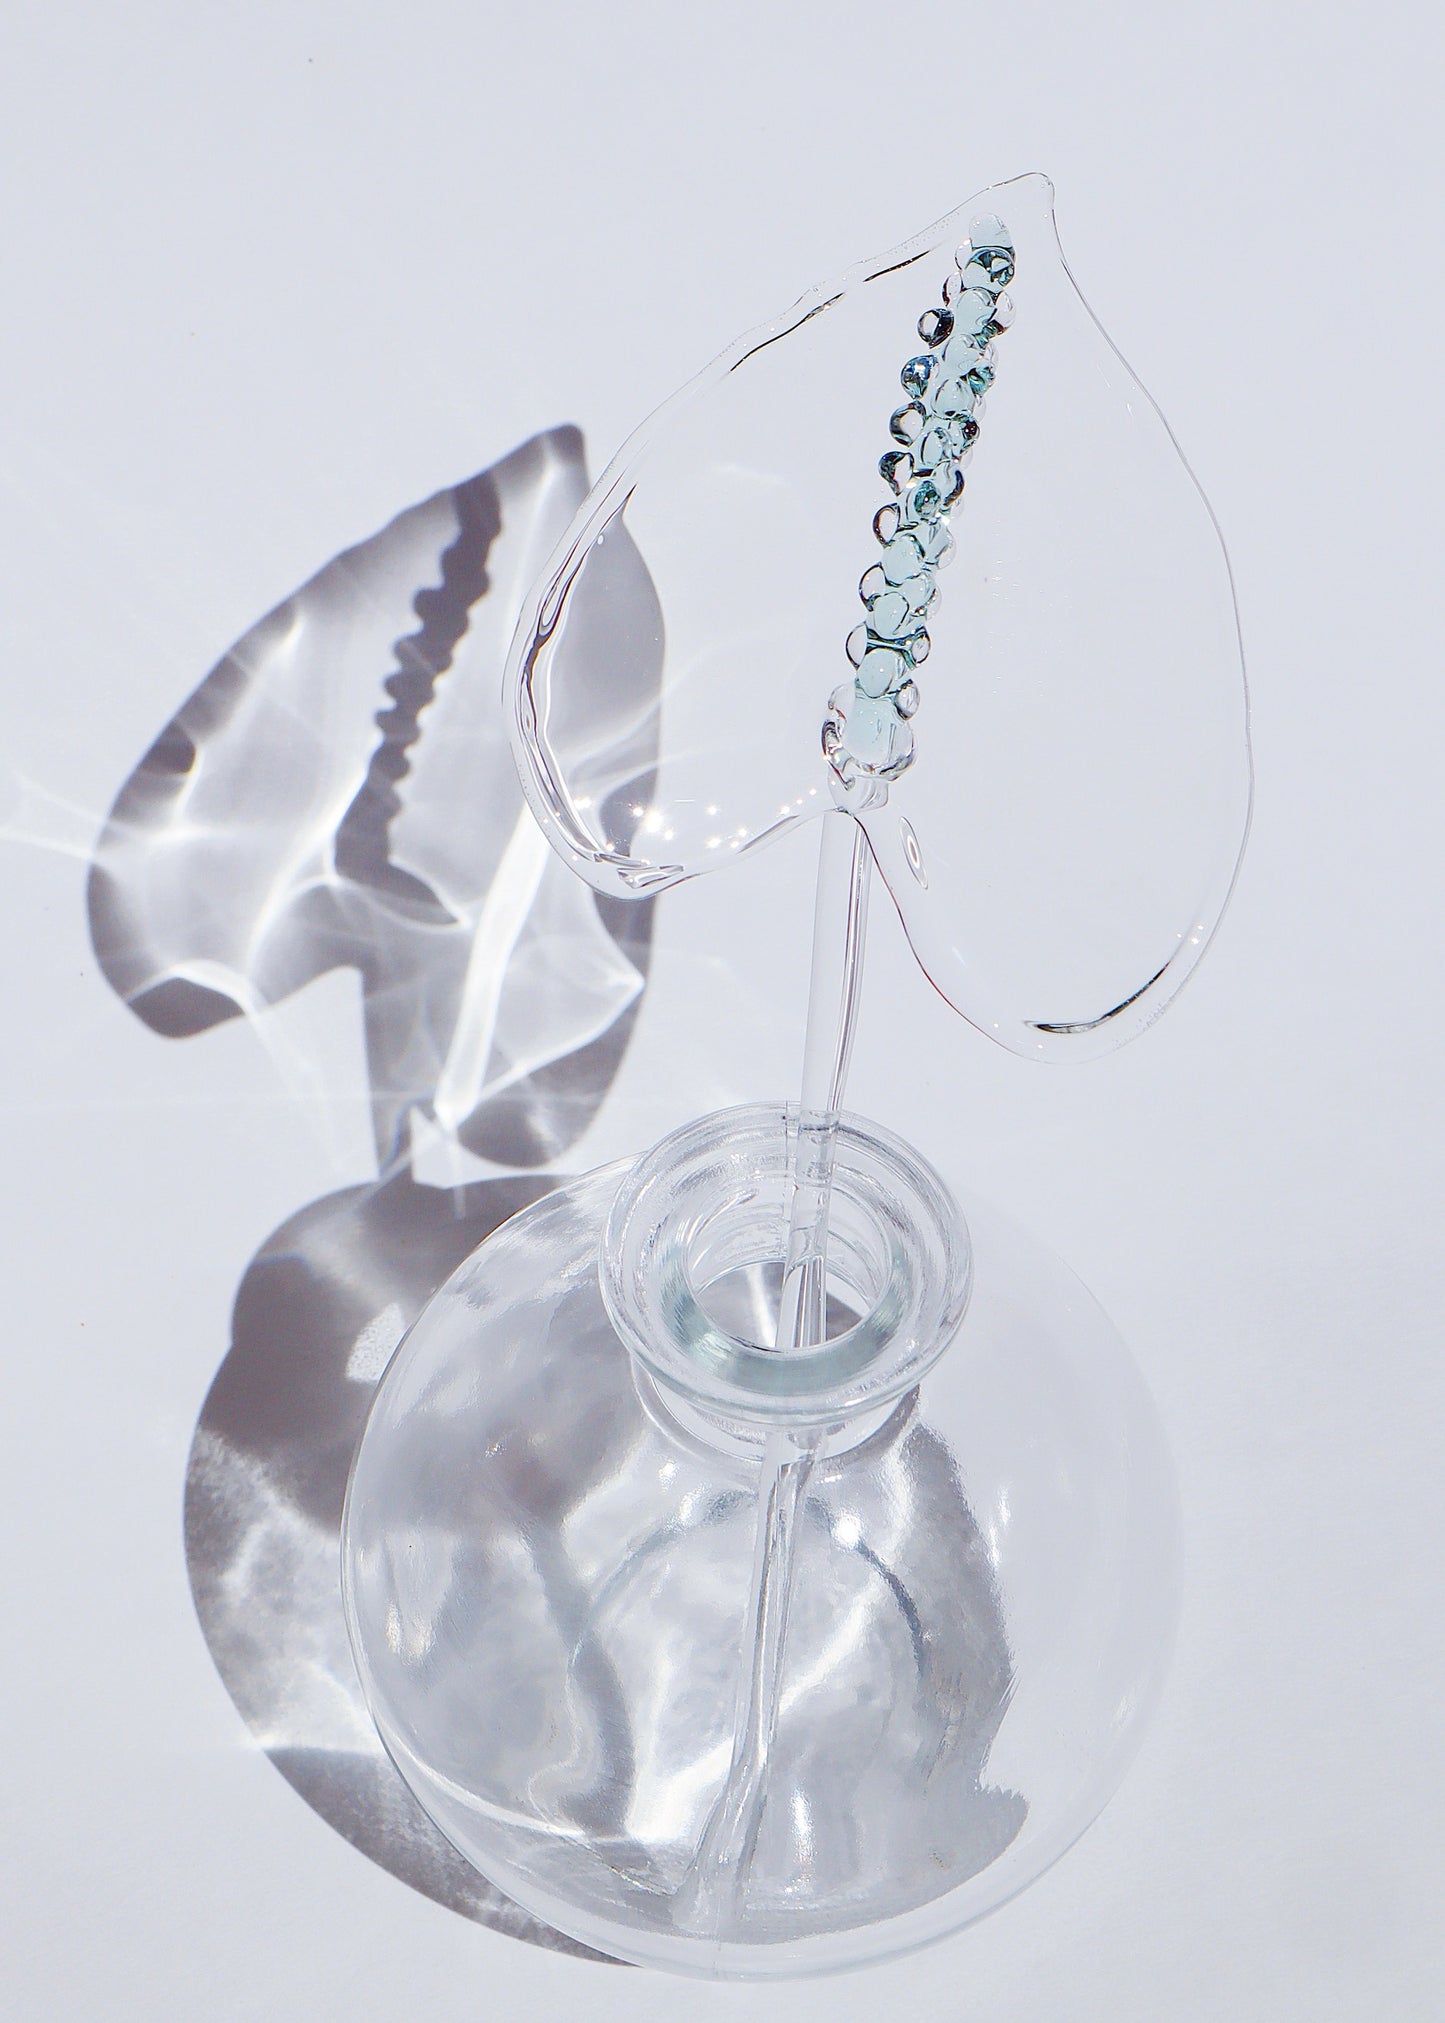 Custom Glass Anthurium Flowers - Made to Order